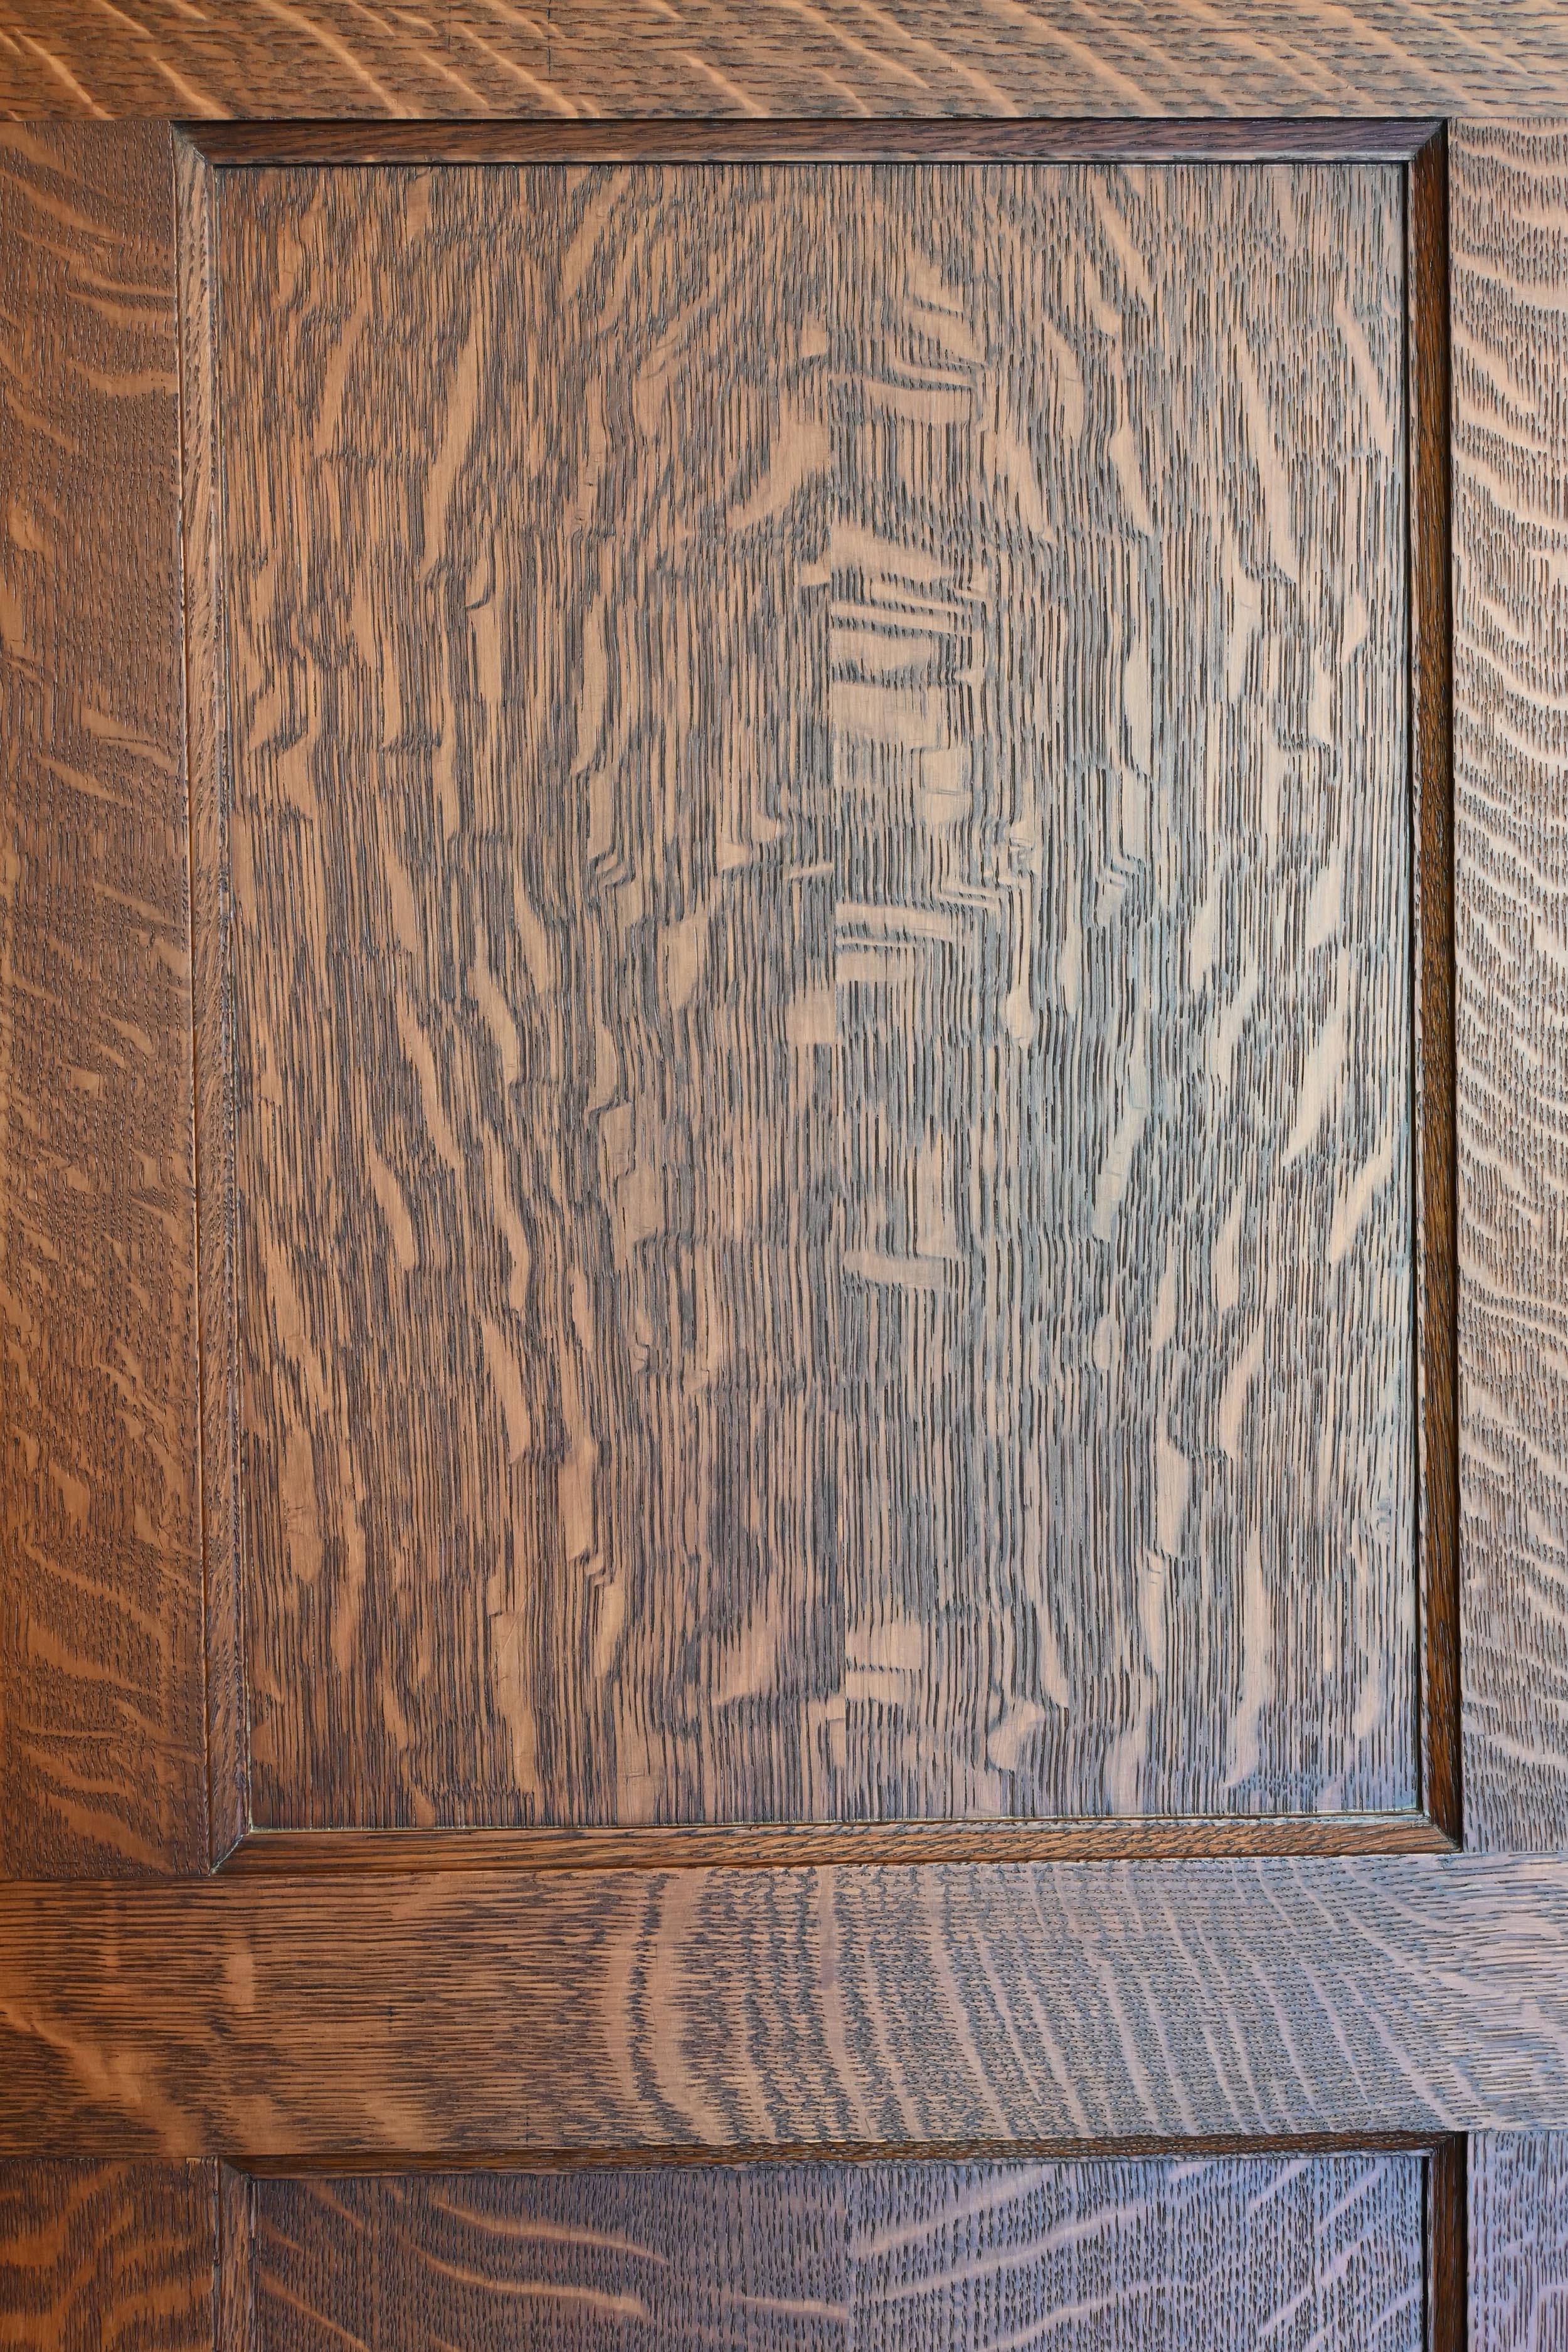 Early 20th Century Tiger Oak 'Quarter Sawn' 1929 Paneled Room & Doors Complete For Sale